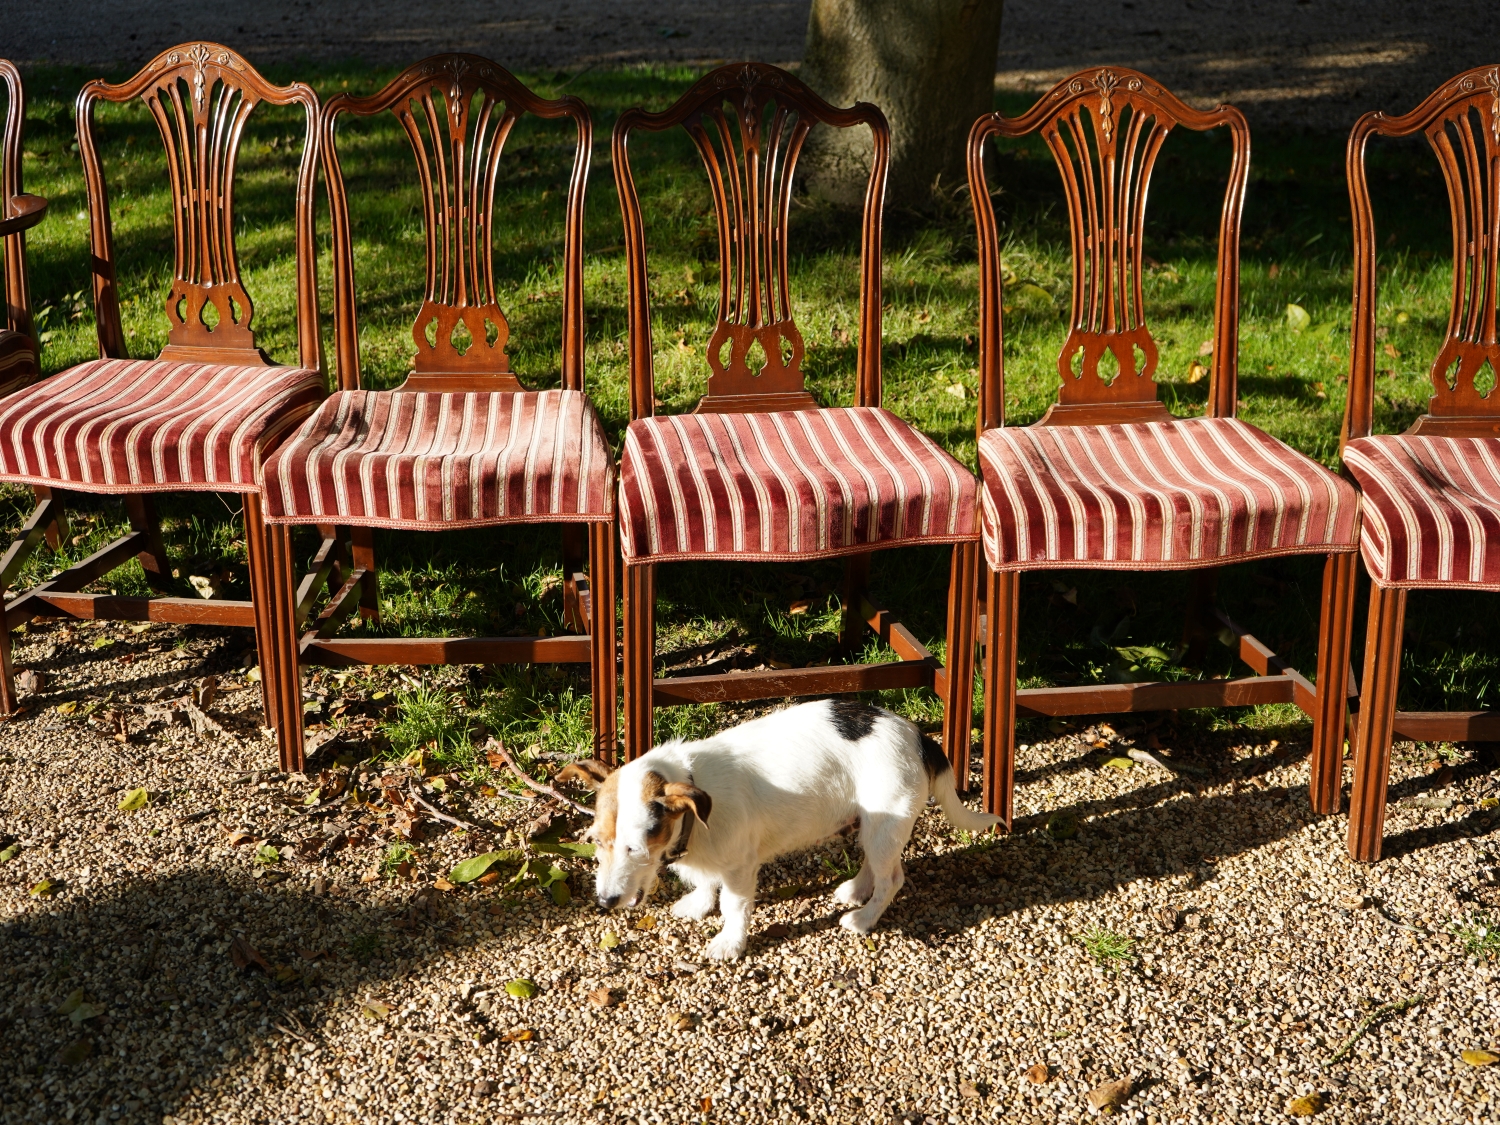 A Fine set of 10 Mahogany Dining Chairs comprising 8 single and 2 matching armchairs. Georgian in style to a design by George Hepplewhite.